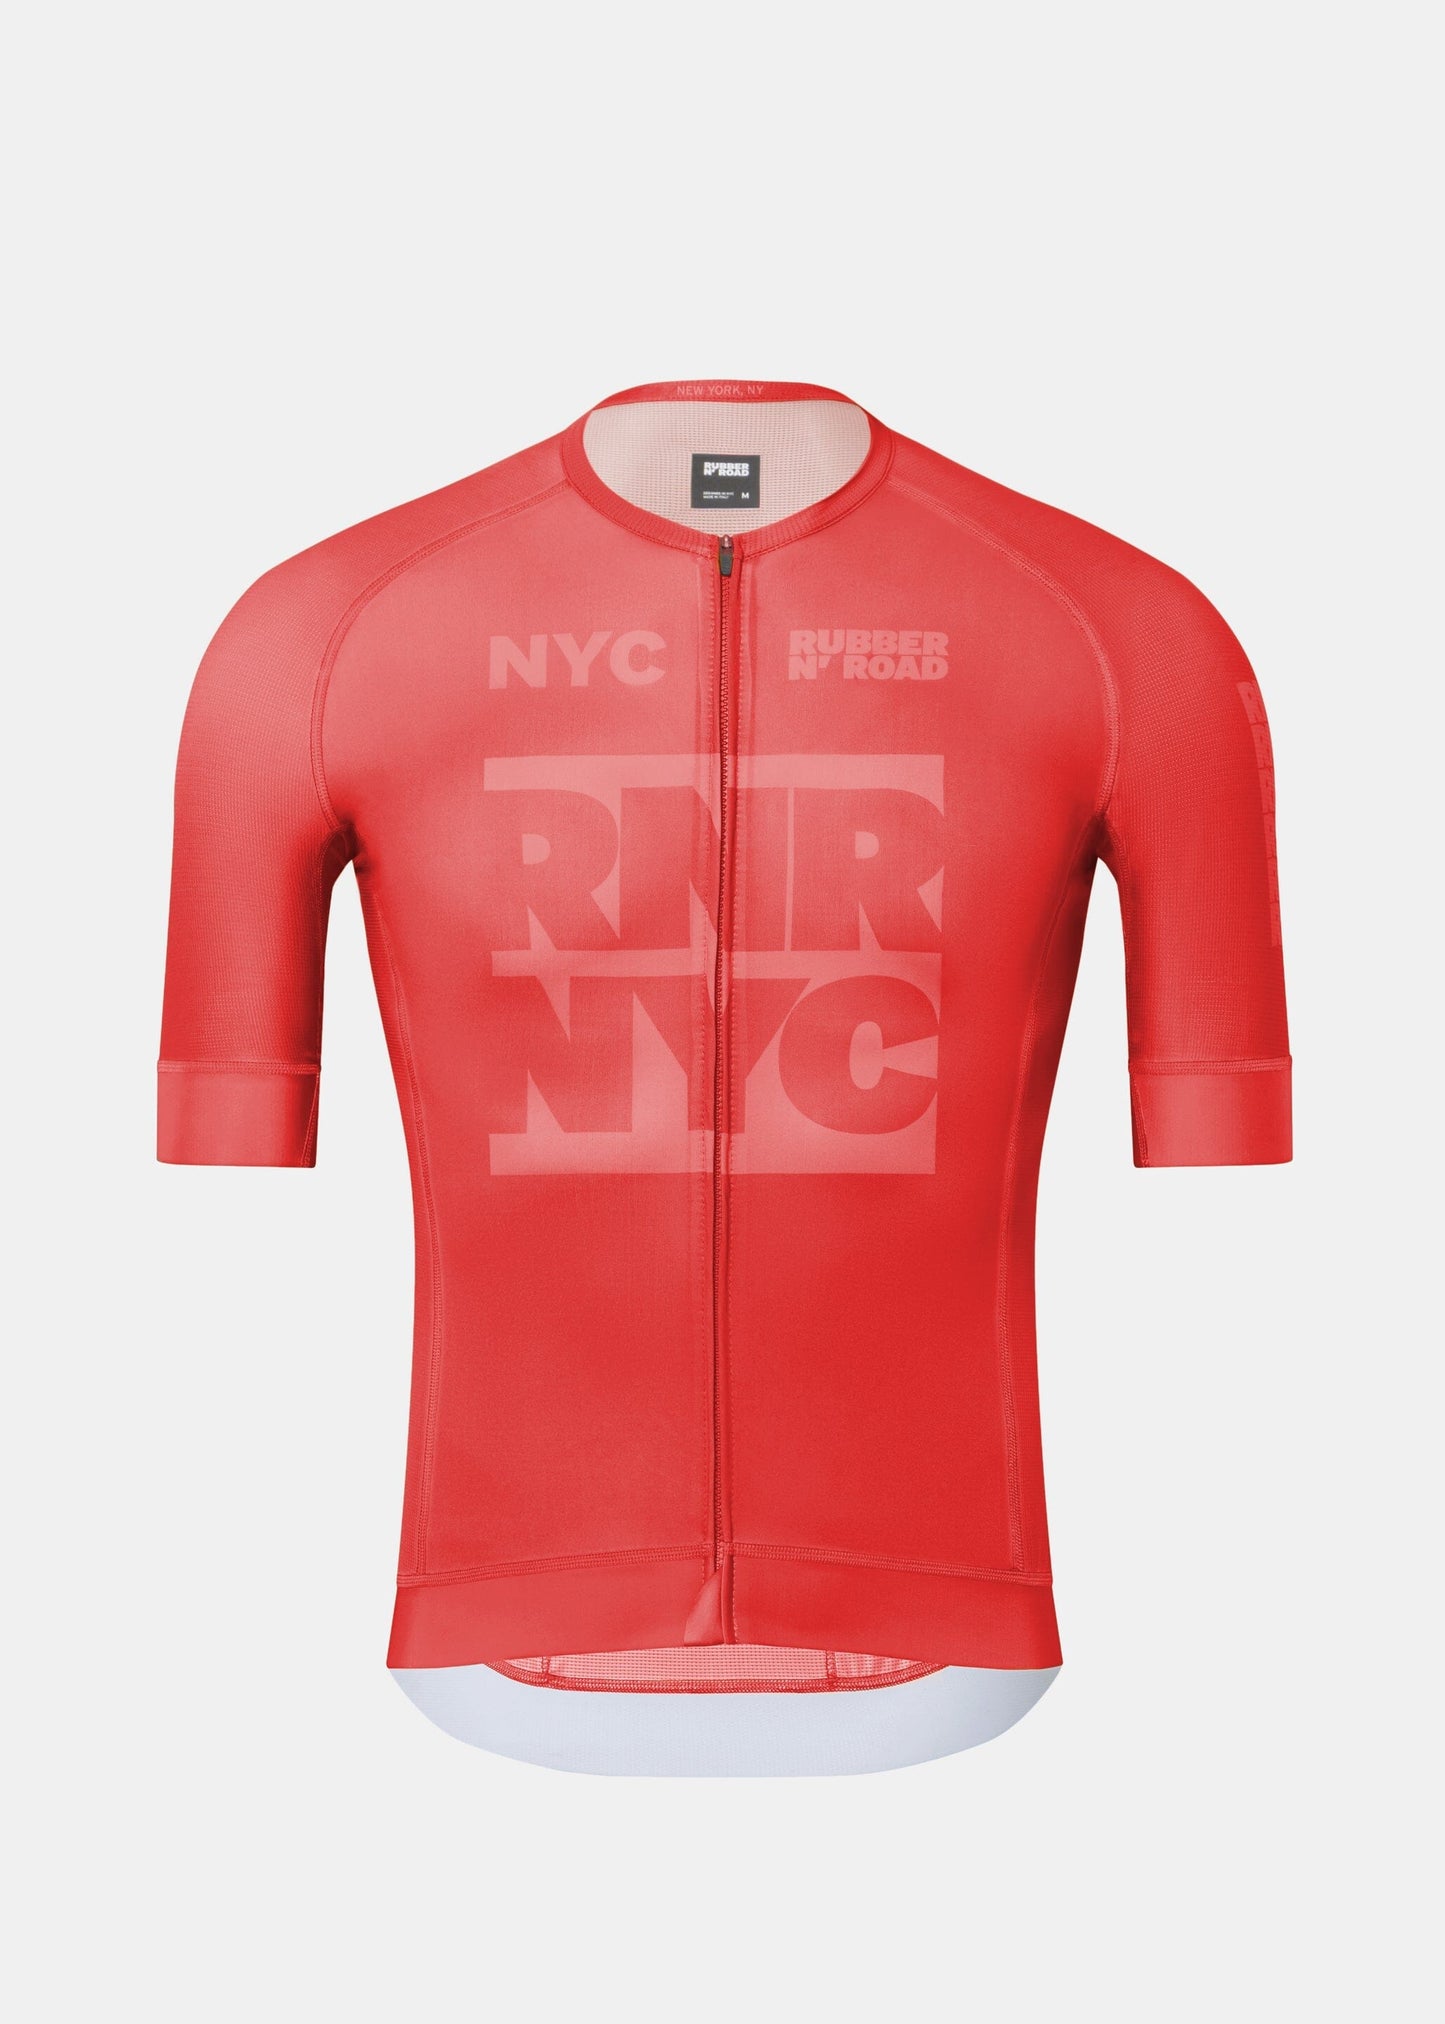 Rubber N' Road - Jersey Shadow Maillots Rubber N' Road Red S 